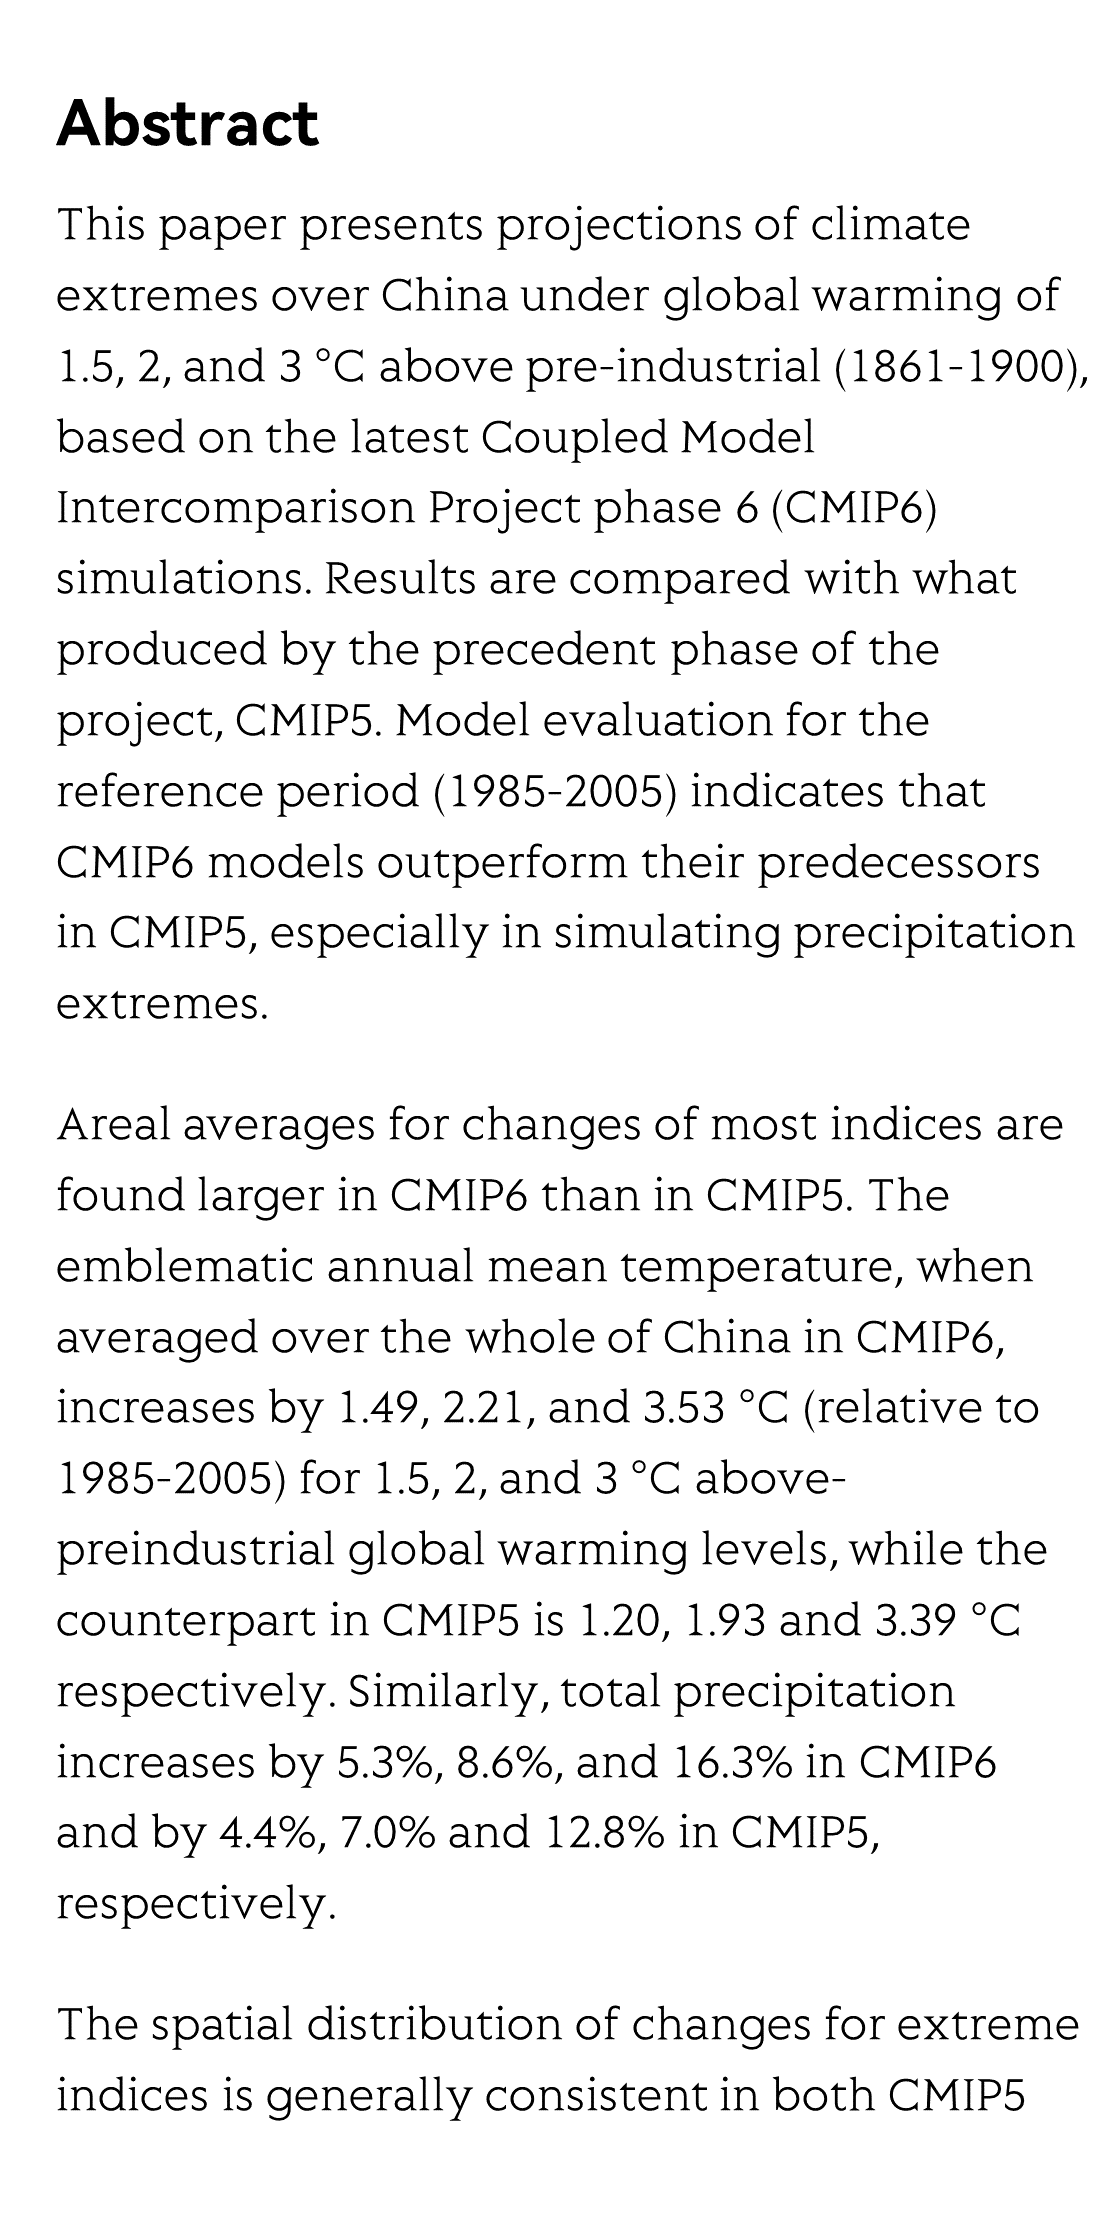 Projection of climate extremes in China, an incremental exercise from CMIP5 to CMIP6_2